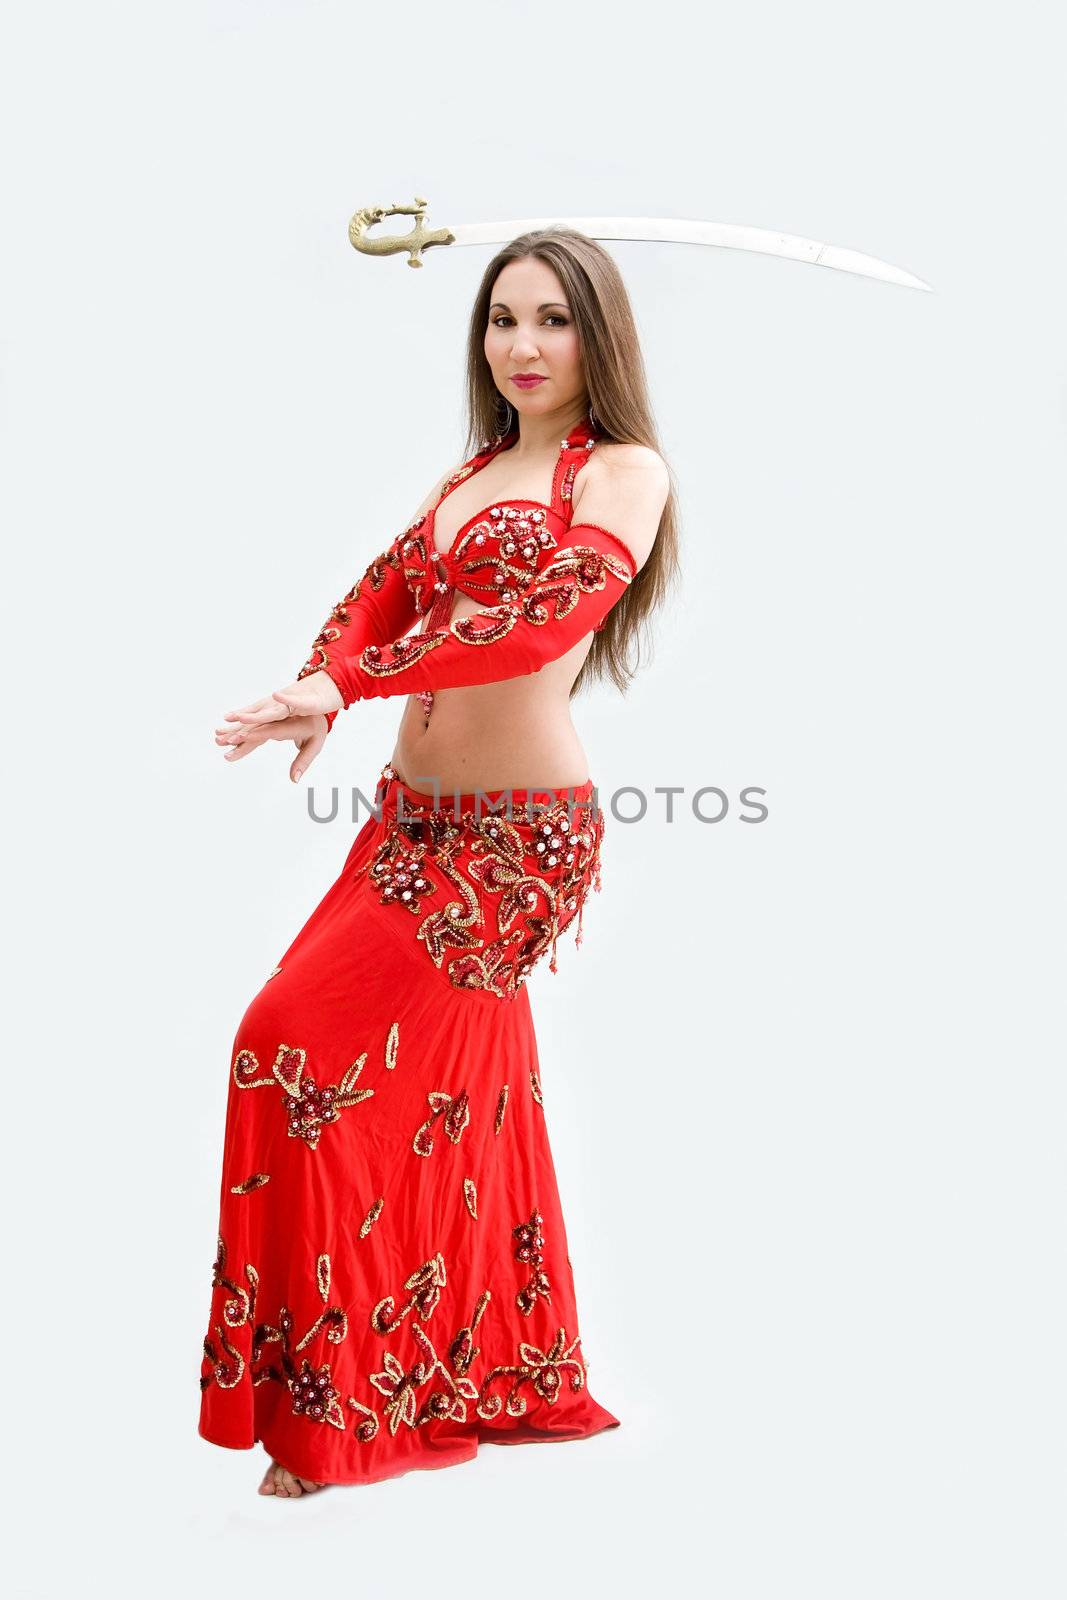 Belly dancer in red by phakimata